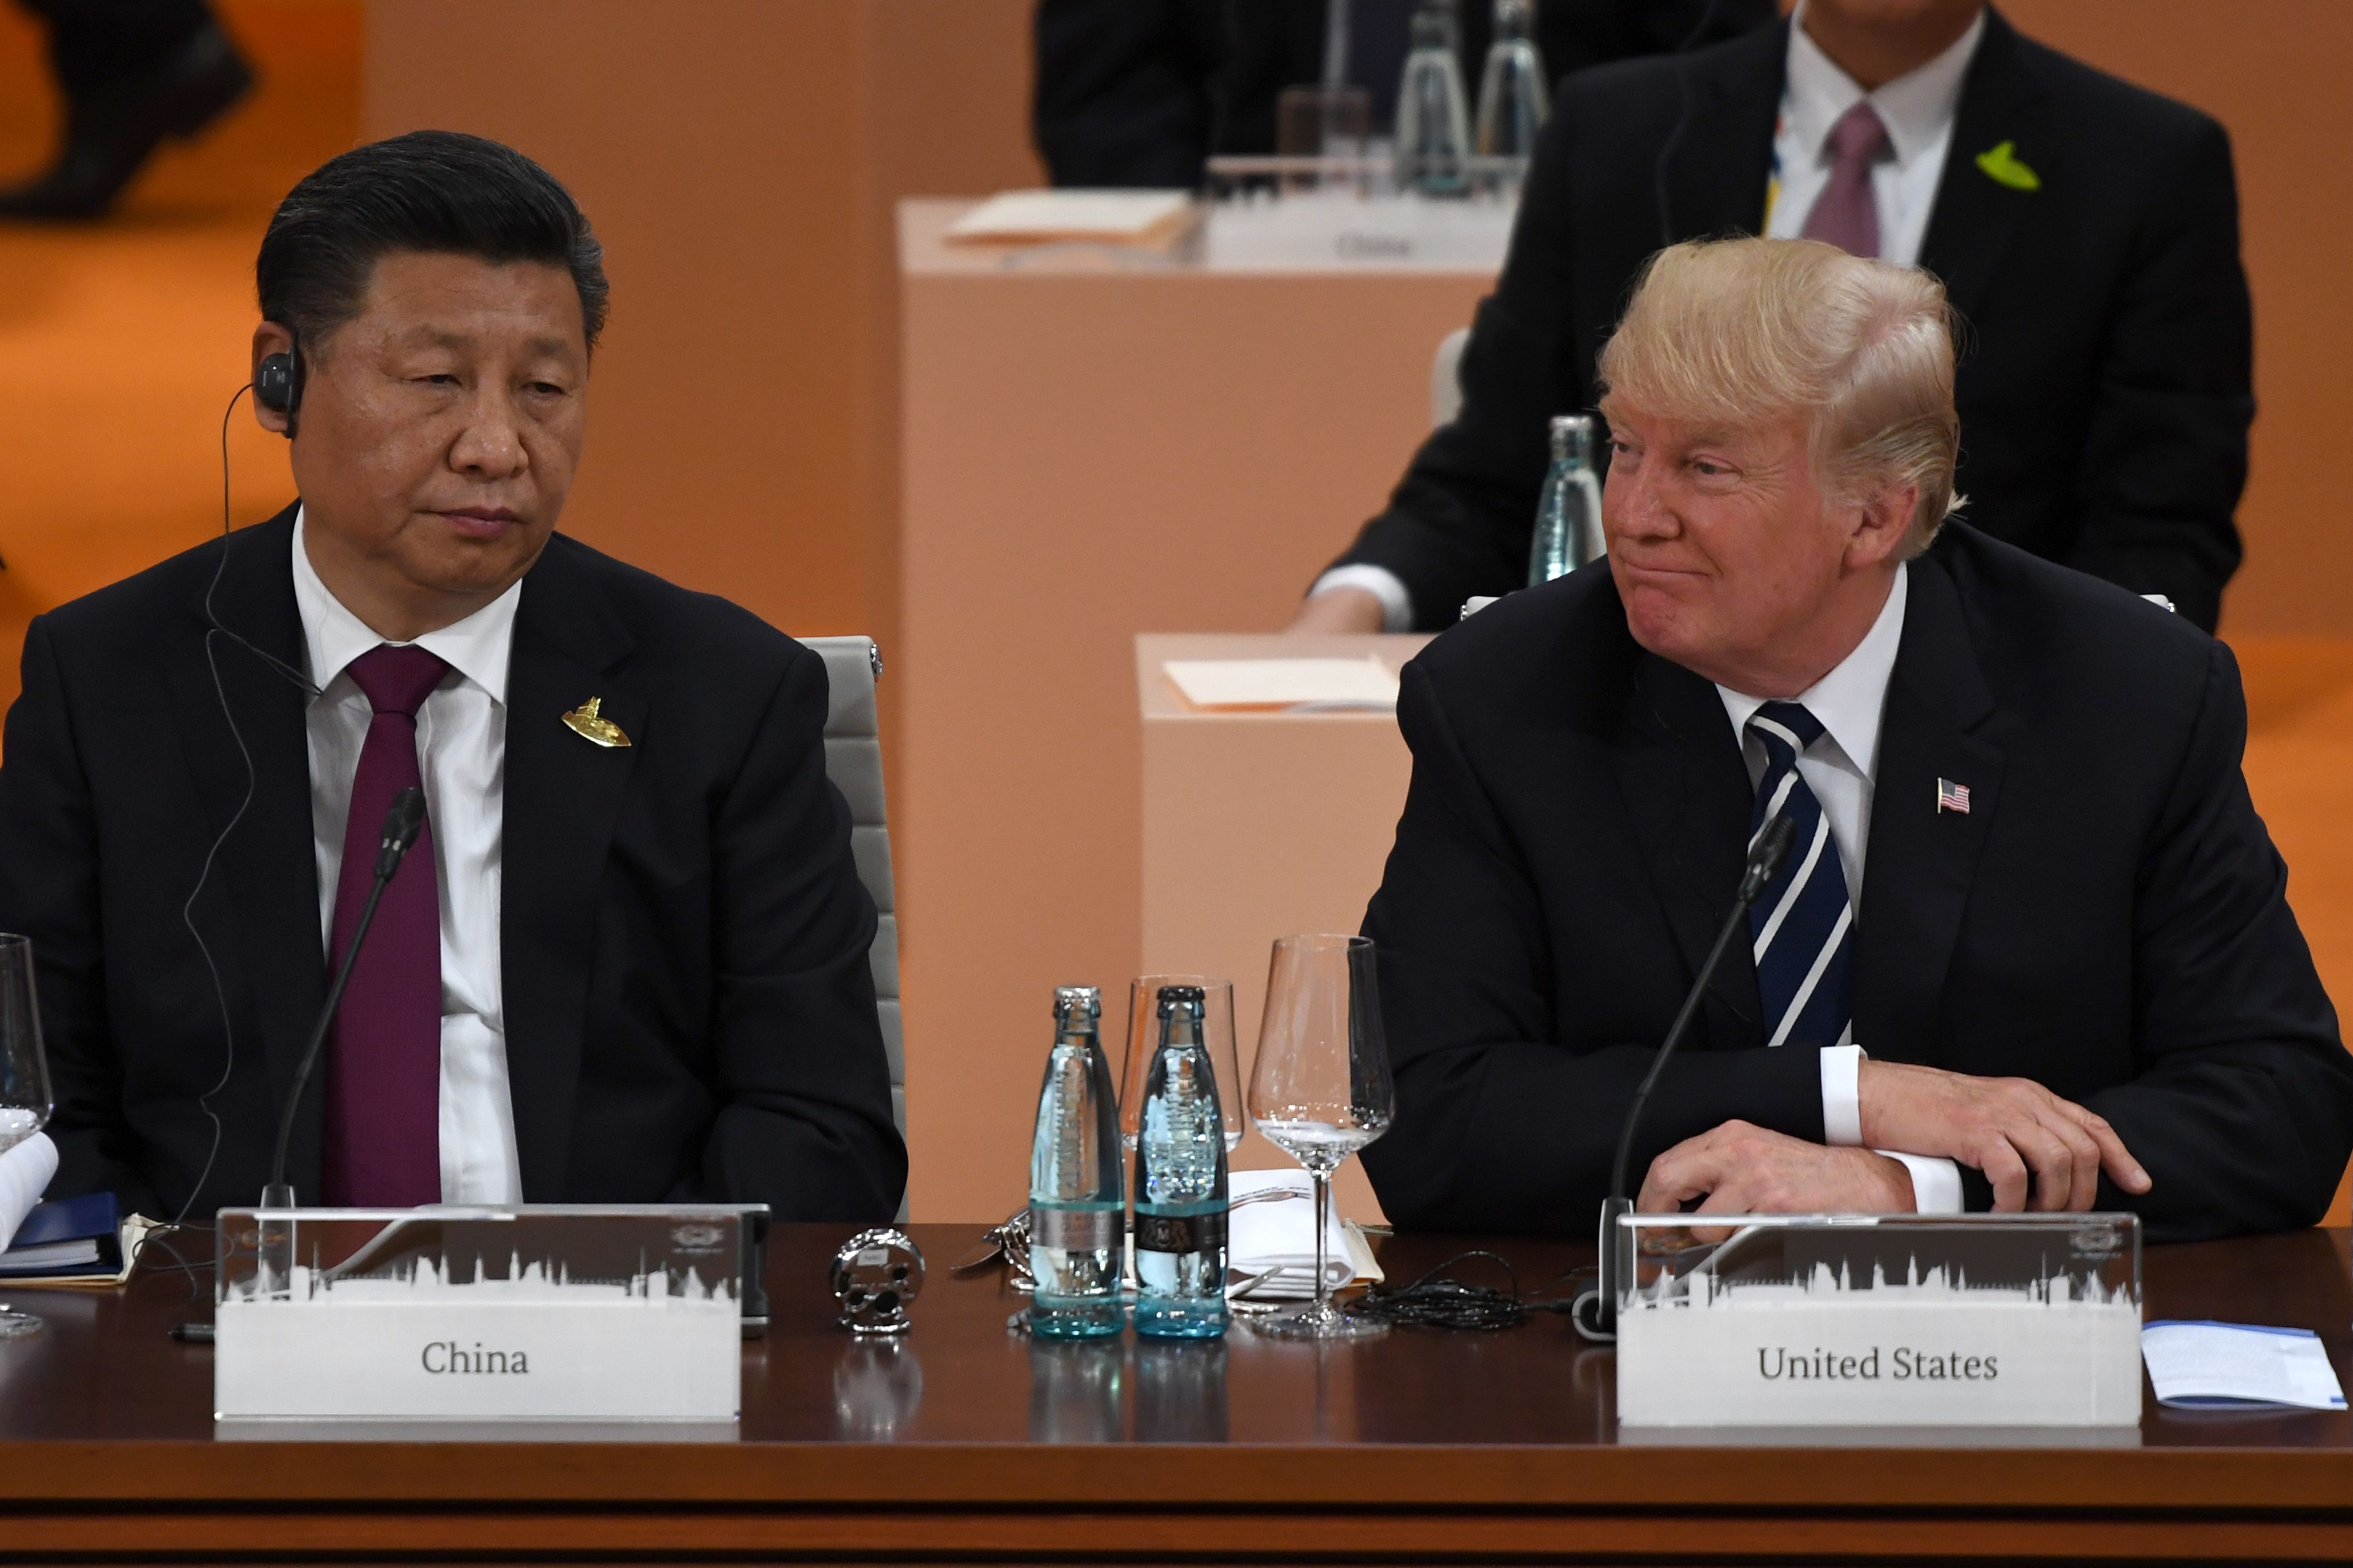 China's President Xi Jinping (L) and US President Donald Trump attend a working session on the first day of the G20 summit in Hamburg, northern Germany, on July 7, 2017. Leaders of the world's top economies gather from July 7 to 8, 2017 in Germany for likely the stormiest G20 summit in years, with disagreements ranging from wars to climate change and global trade. / AFP PHOTO / Patrik STOLLARZ (Photo credit should read PATRIK STOLLARZ/AFP/Getty Images)